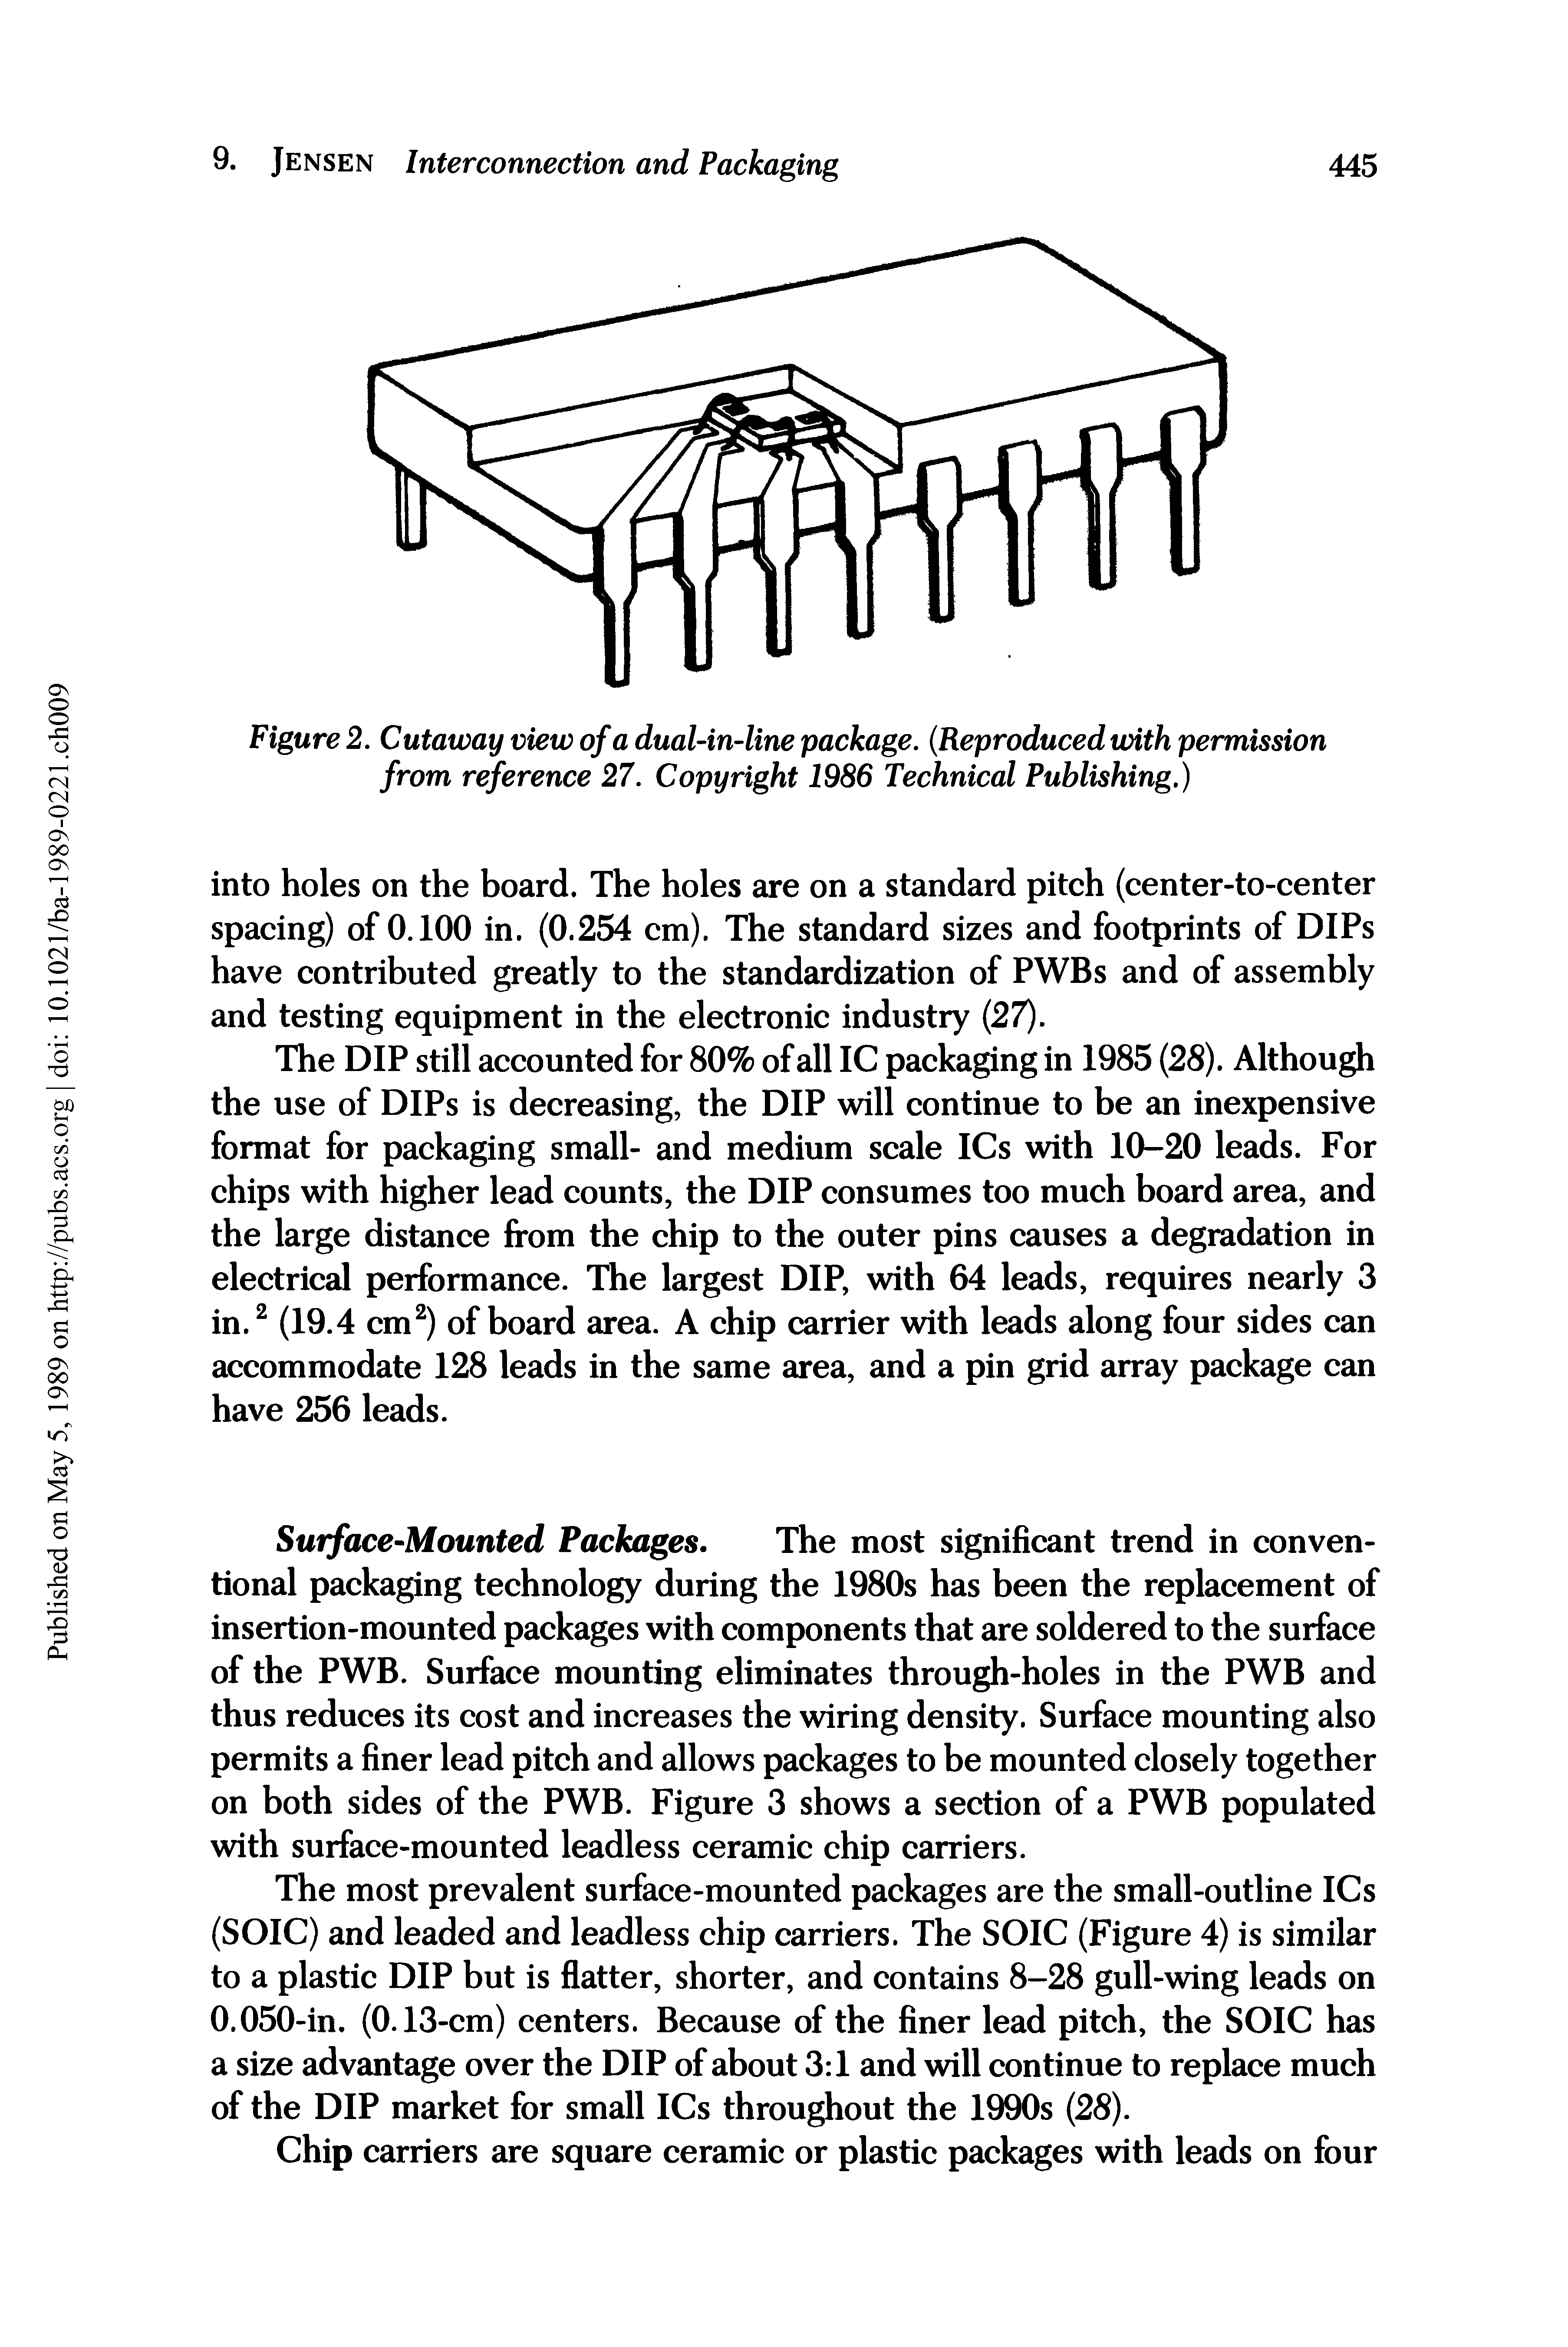 Figure 2. Cutaway view of a dual-in-line package. (Reproduced with permission from reference 27. Copyright 1986 Technical Publishing.)...